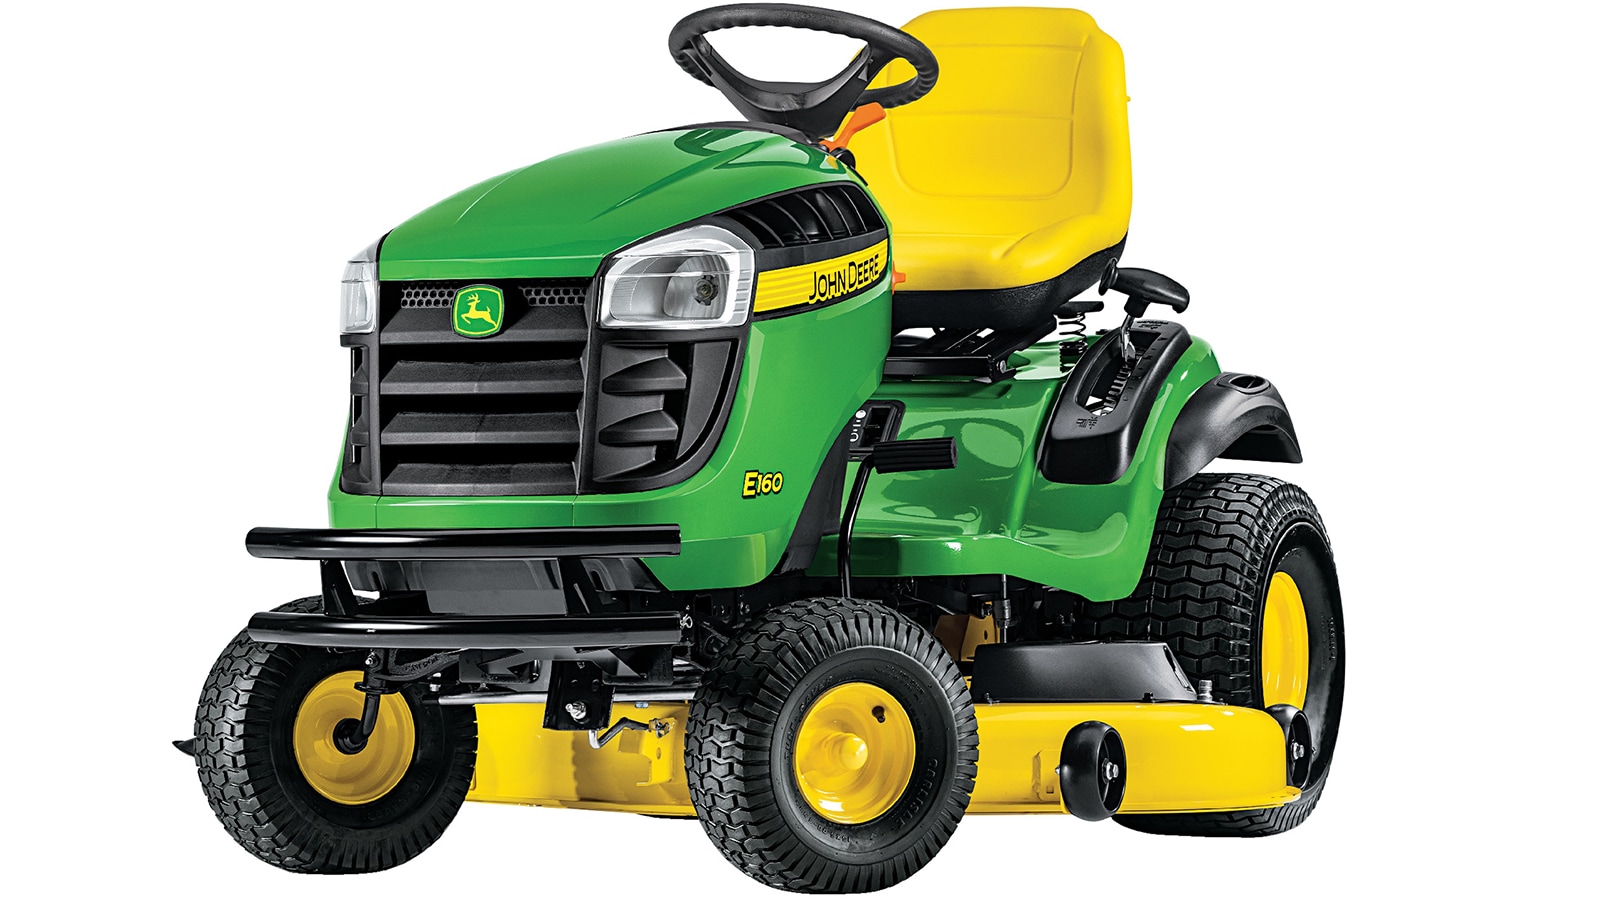 100 Series lawn tractors are comfortable and hassle-free